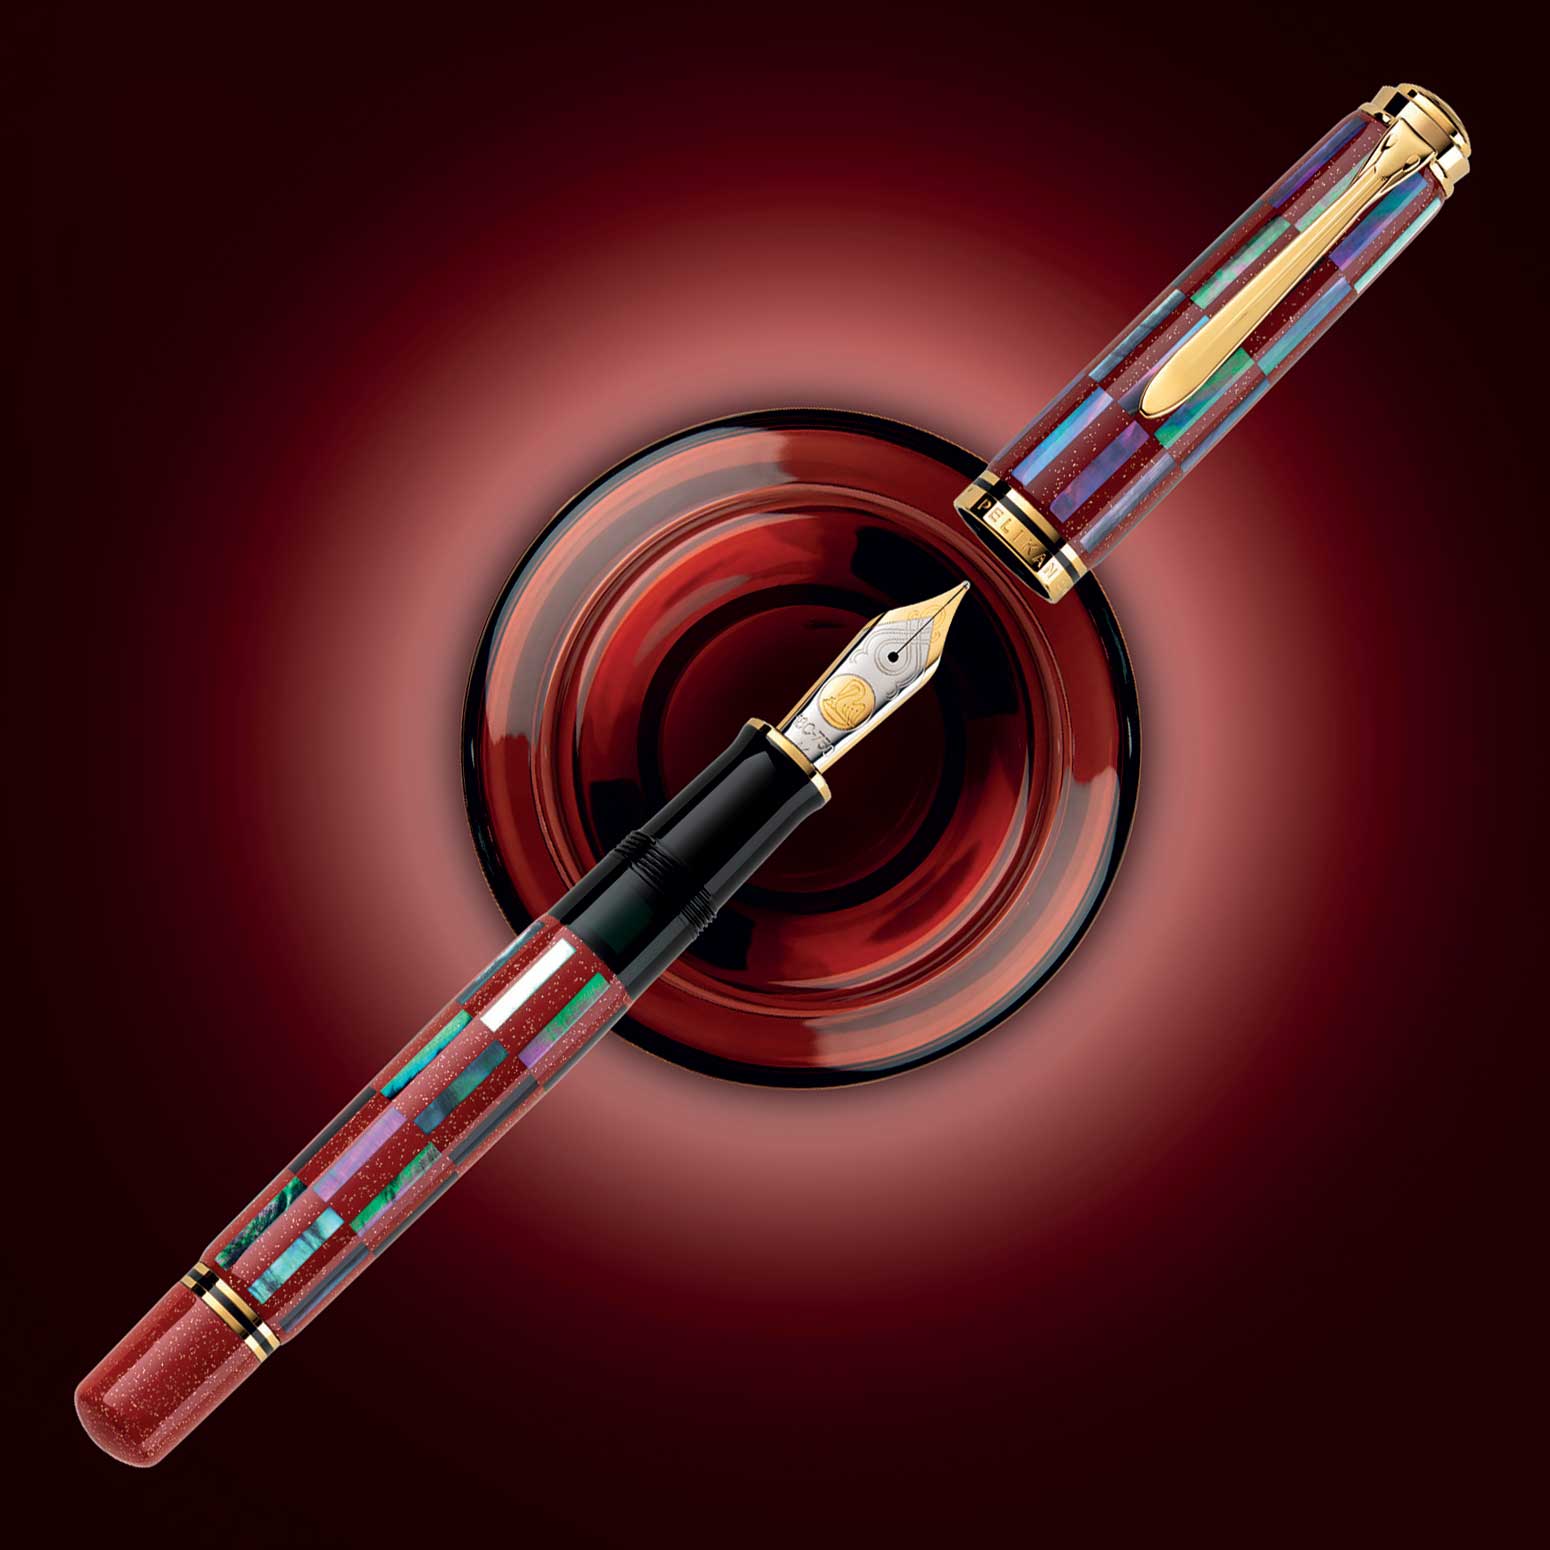 Pelikan-M1000-Raden-Red-Infinity-Limited-Edition-fountain-pen-nibsmith-uncappped